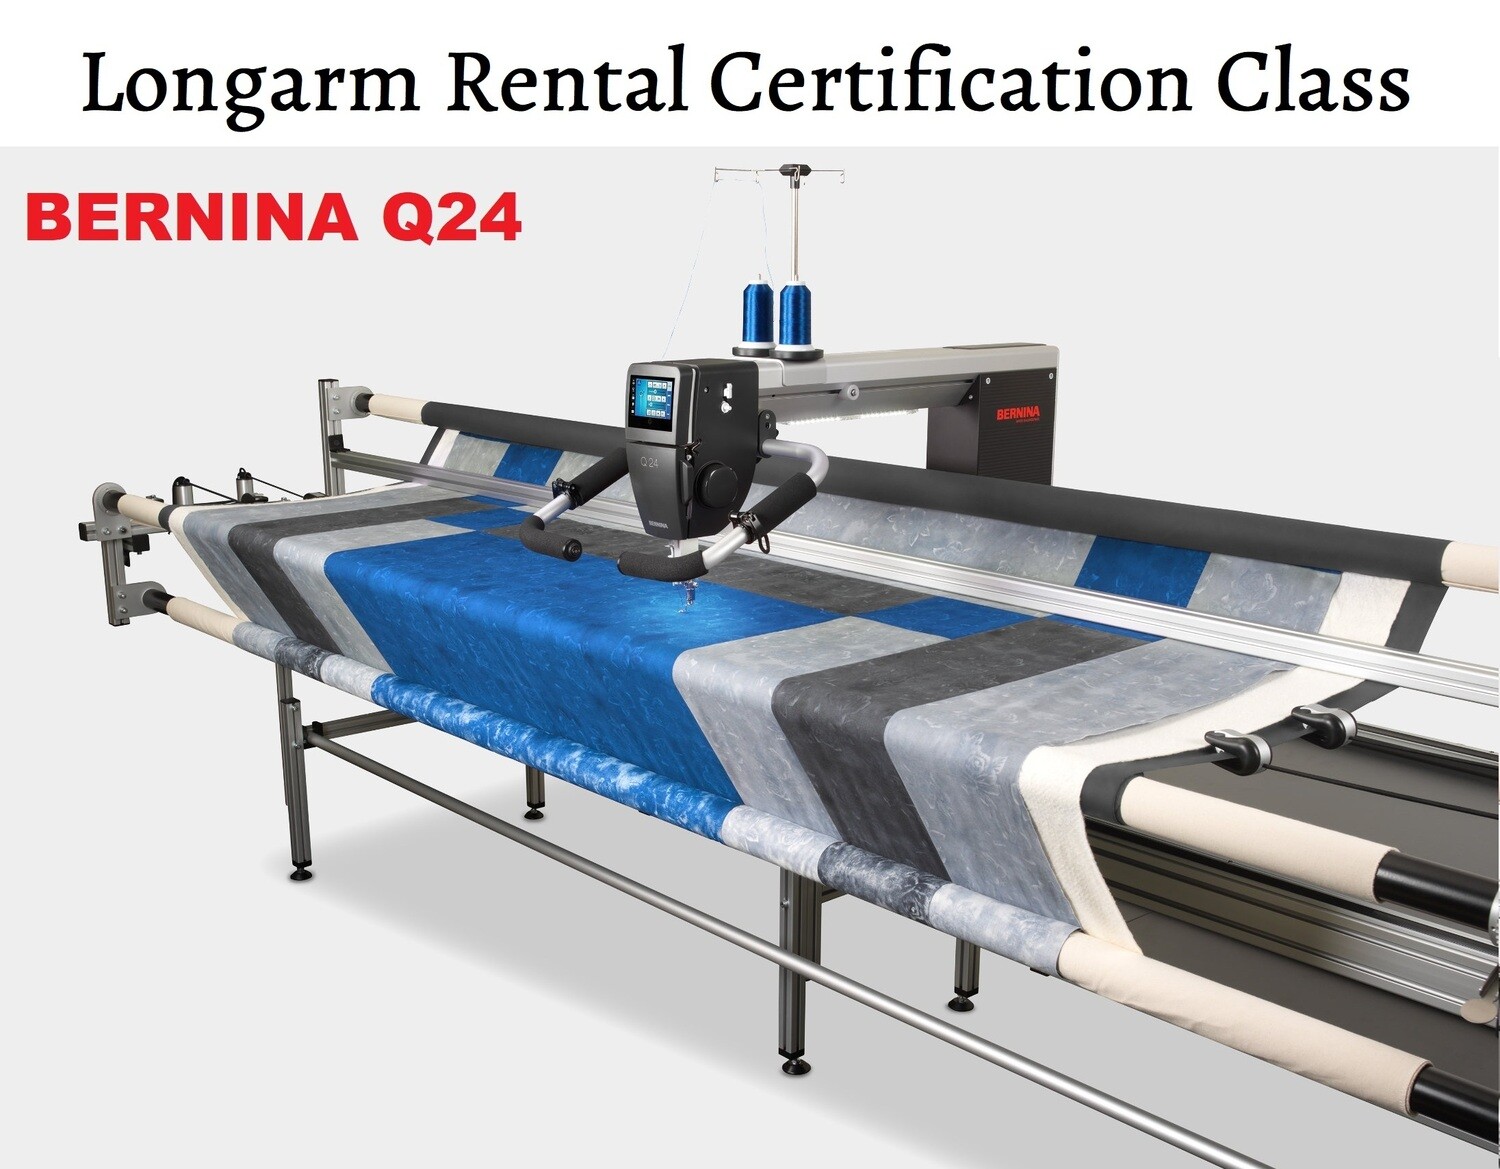 ​LONGARM RENTAL CERTIFICATION CLASS
Thursday May 18th, 10:30 am - 4:00 pm